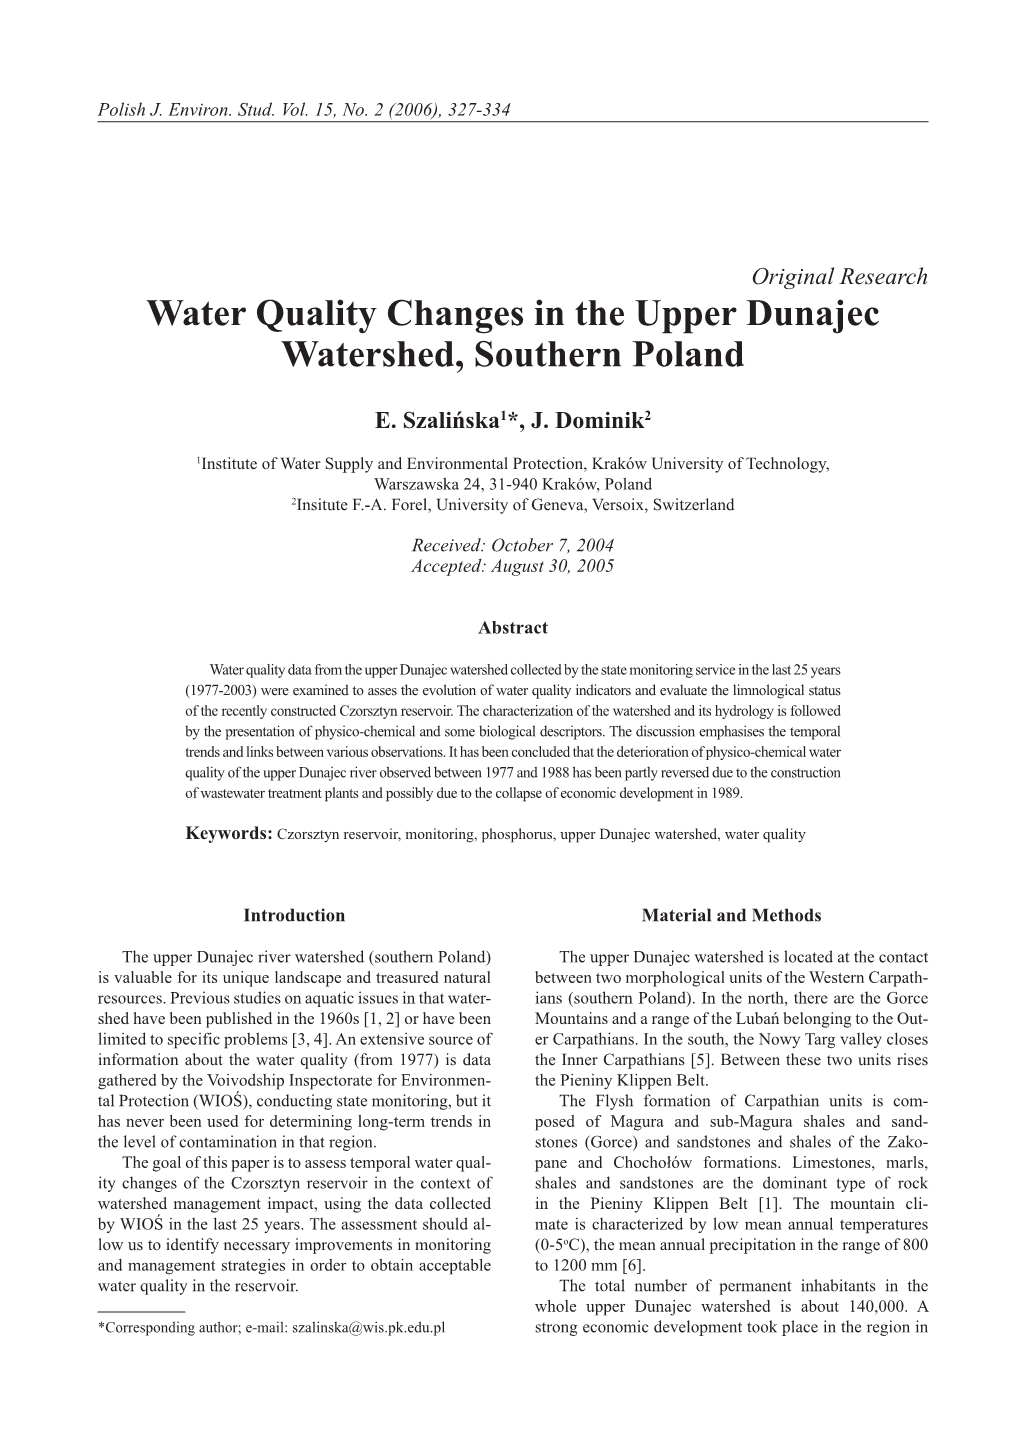 Water Quality Changes in the Upper Dunajec Watershed, Southern Poland